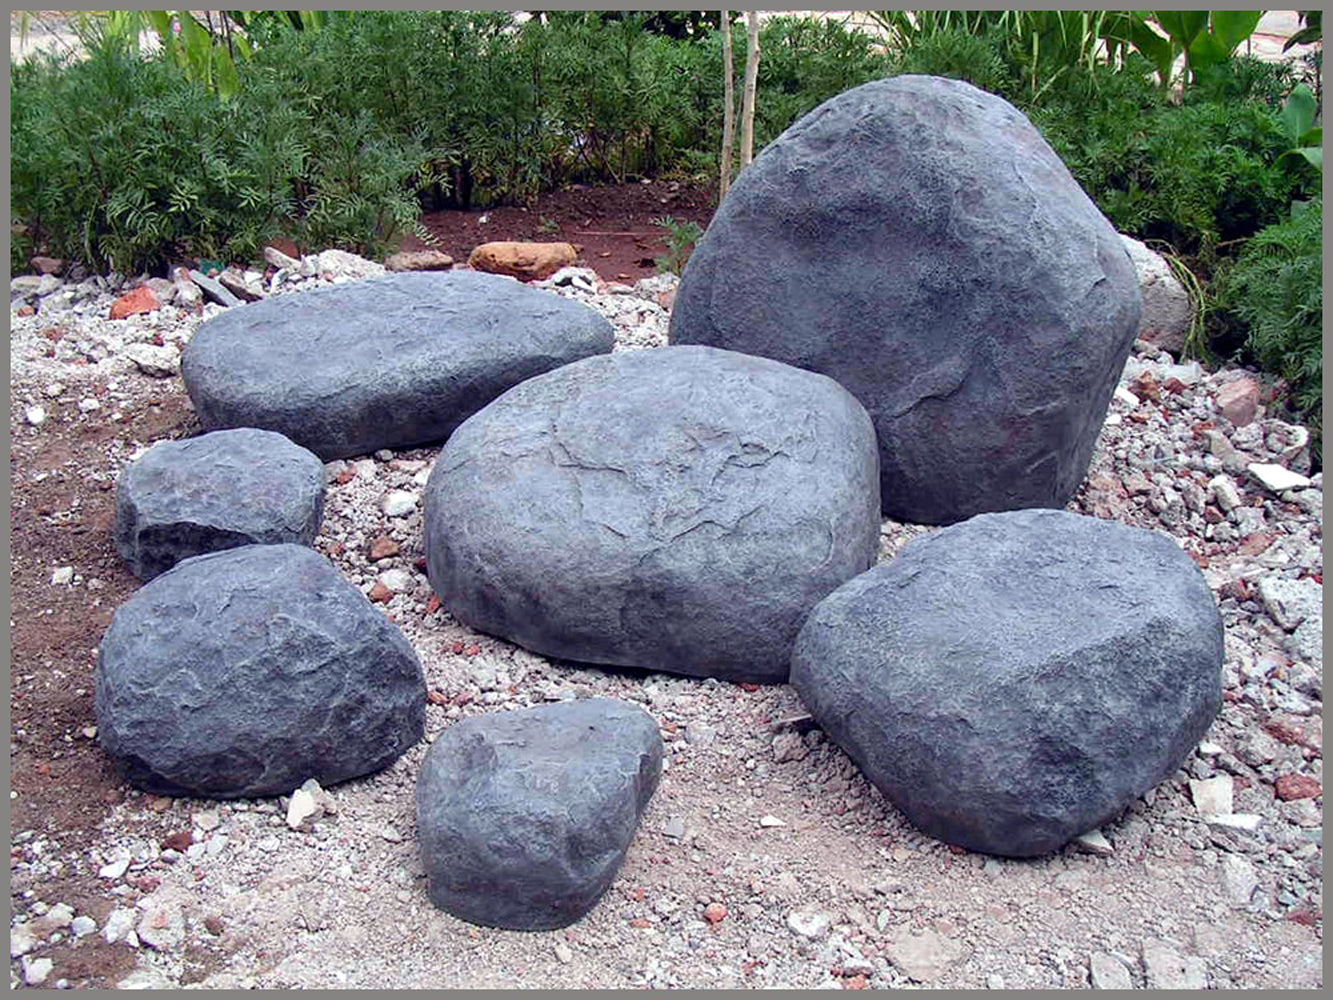 Fake boulders are a part of any good set designer's repertoire.